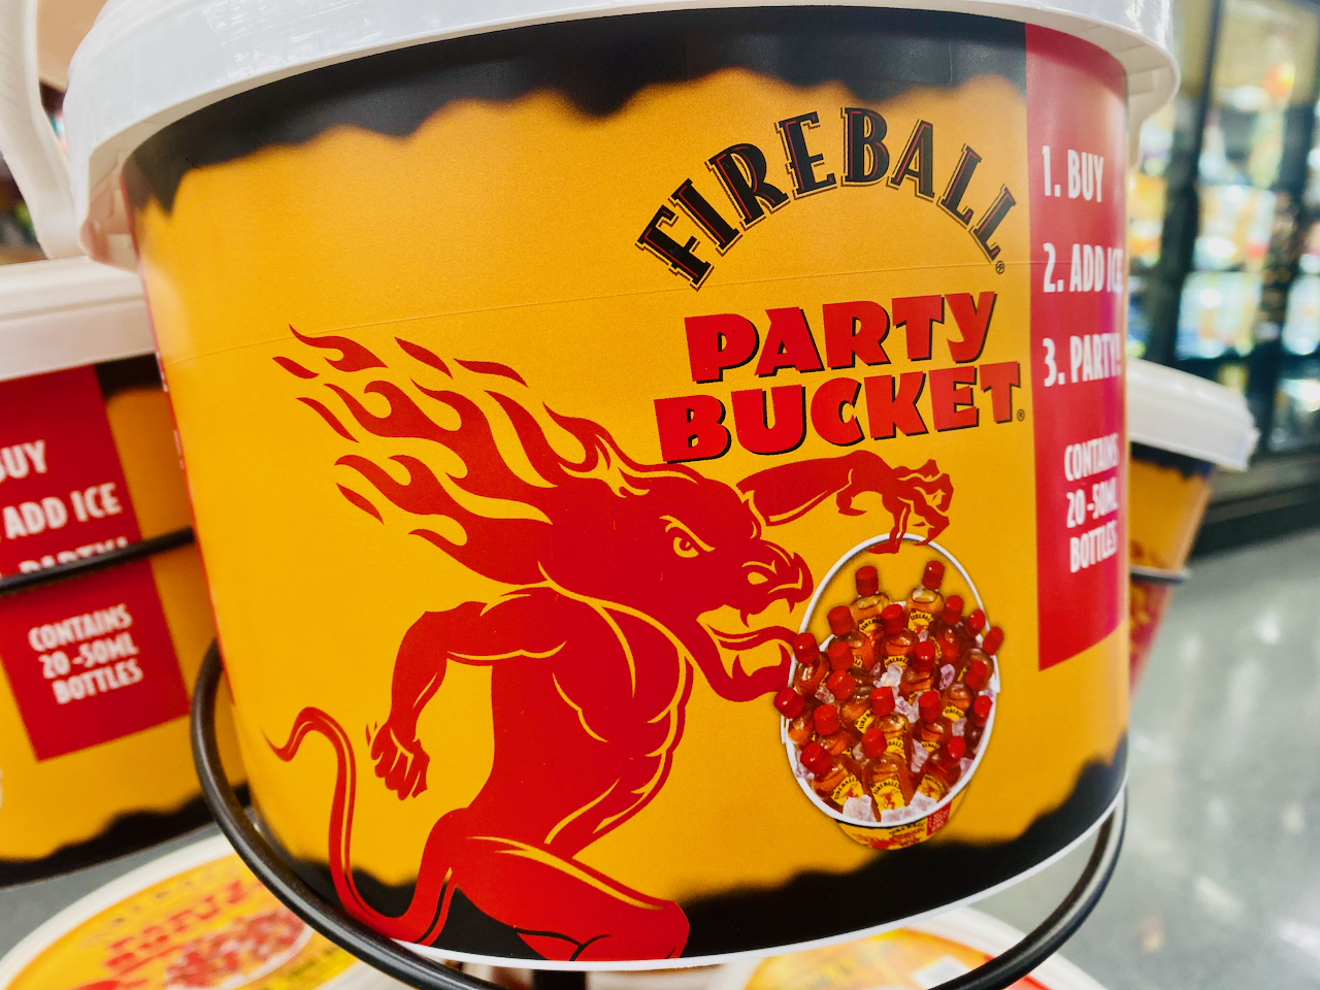 Buckets of Fireball at the grocery store.